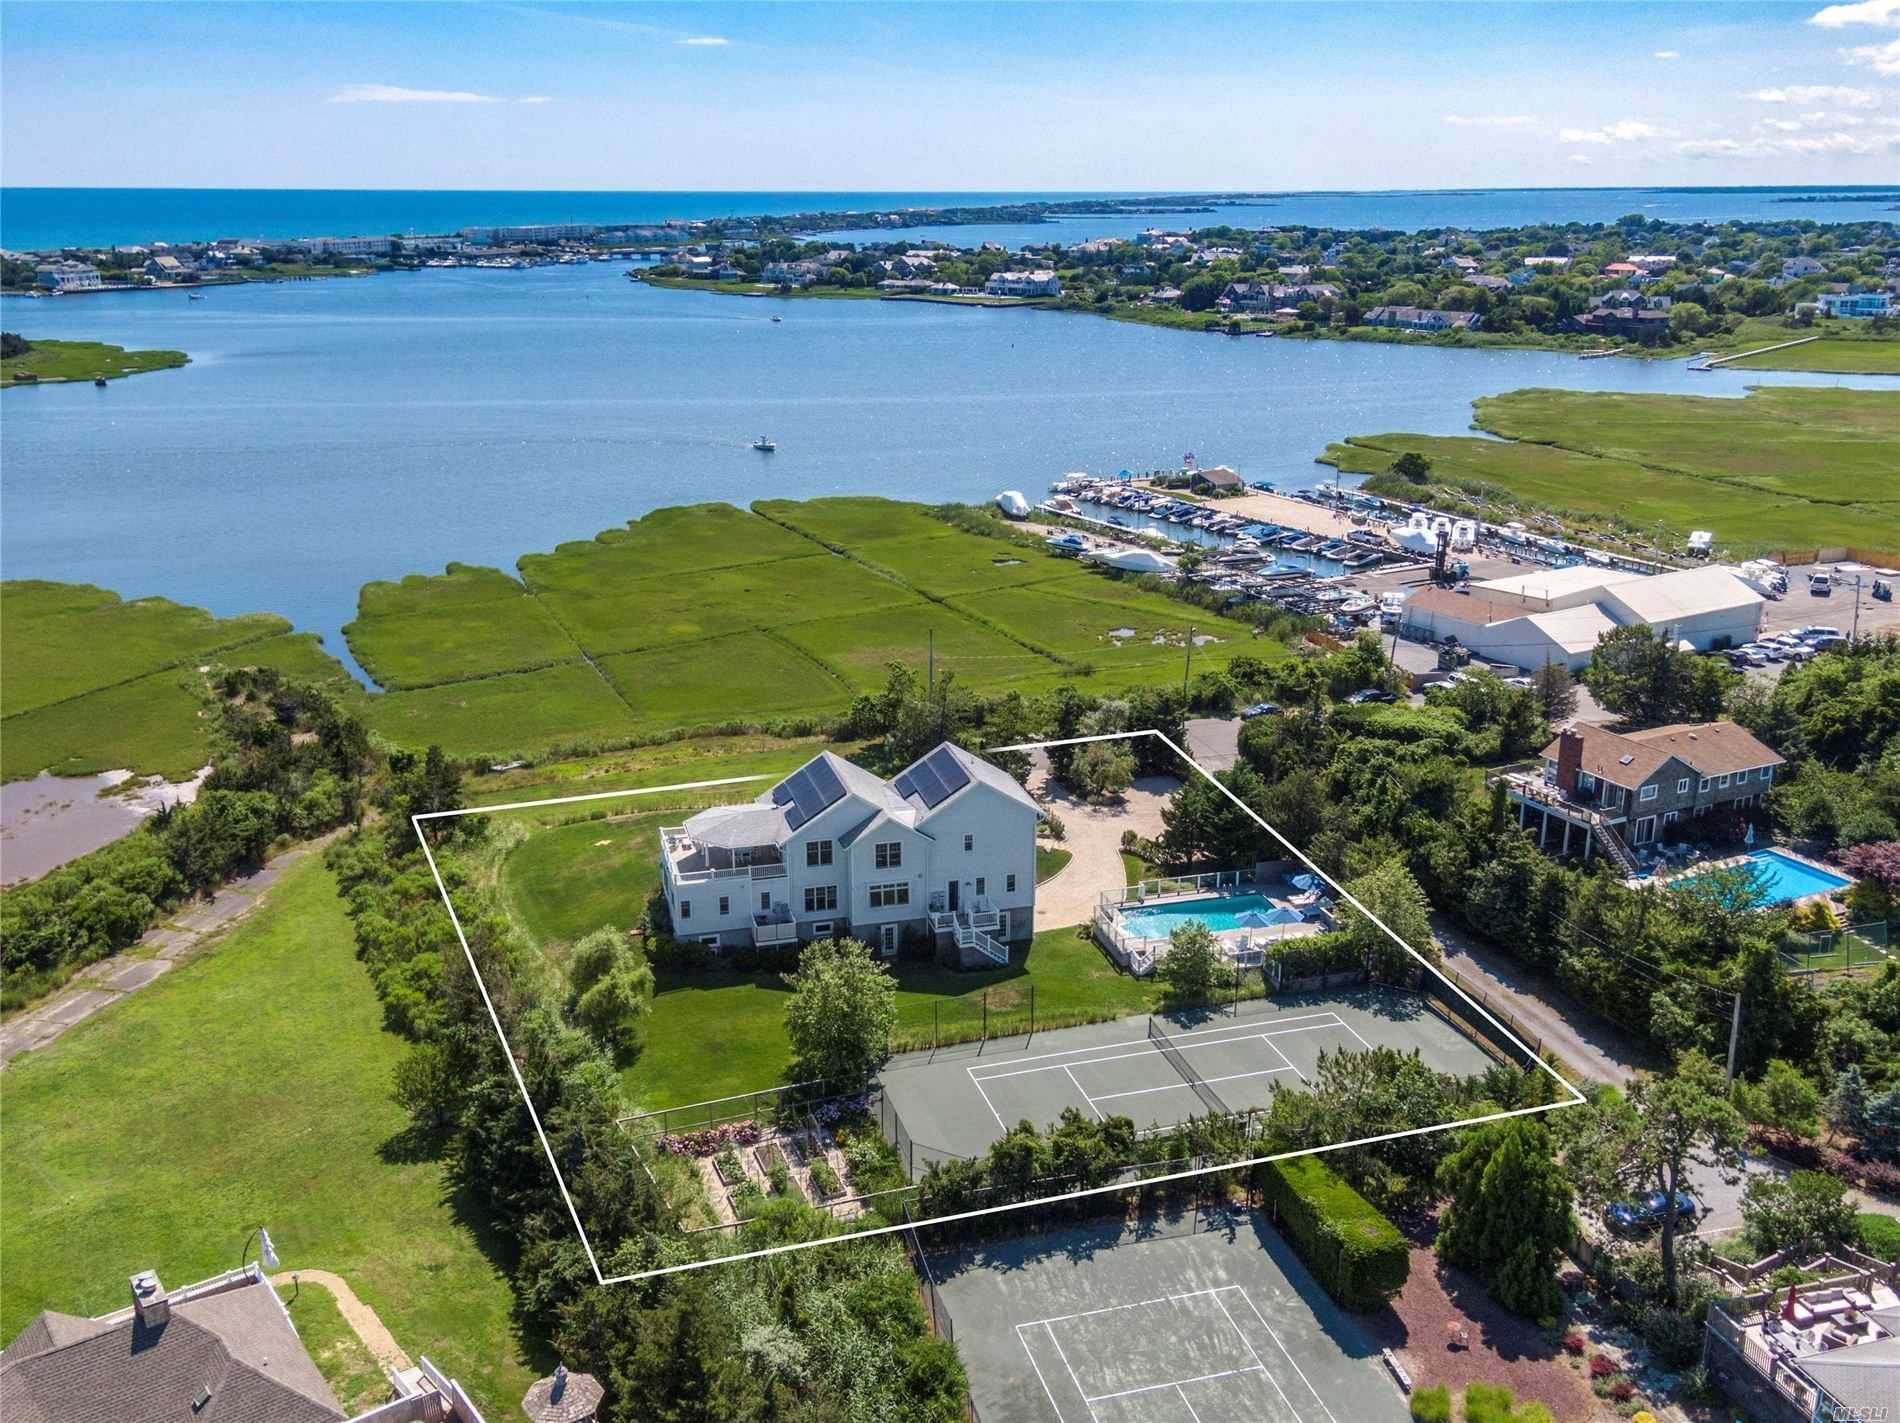 A rare opportunity to own a turn key waterfront home less than half a mile from both the Village and the beach, and surrounded by protected wetlands for unobstructed private ...